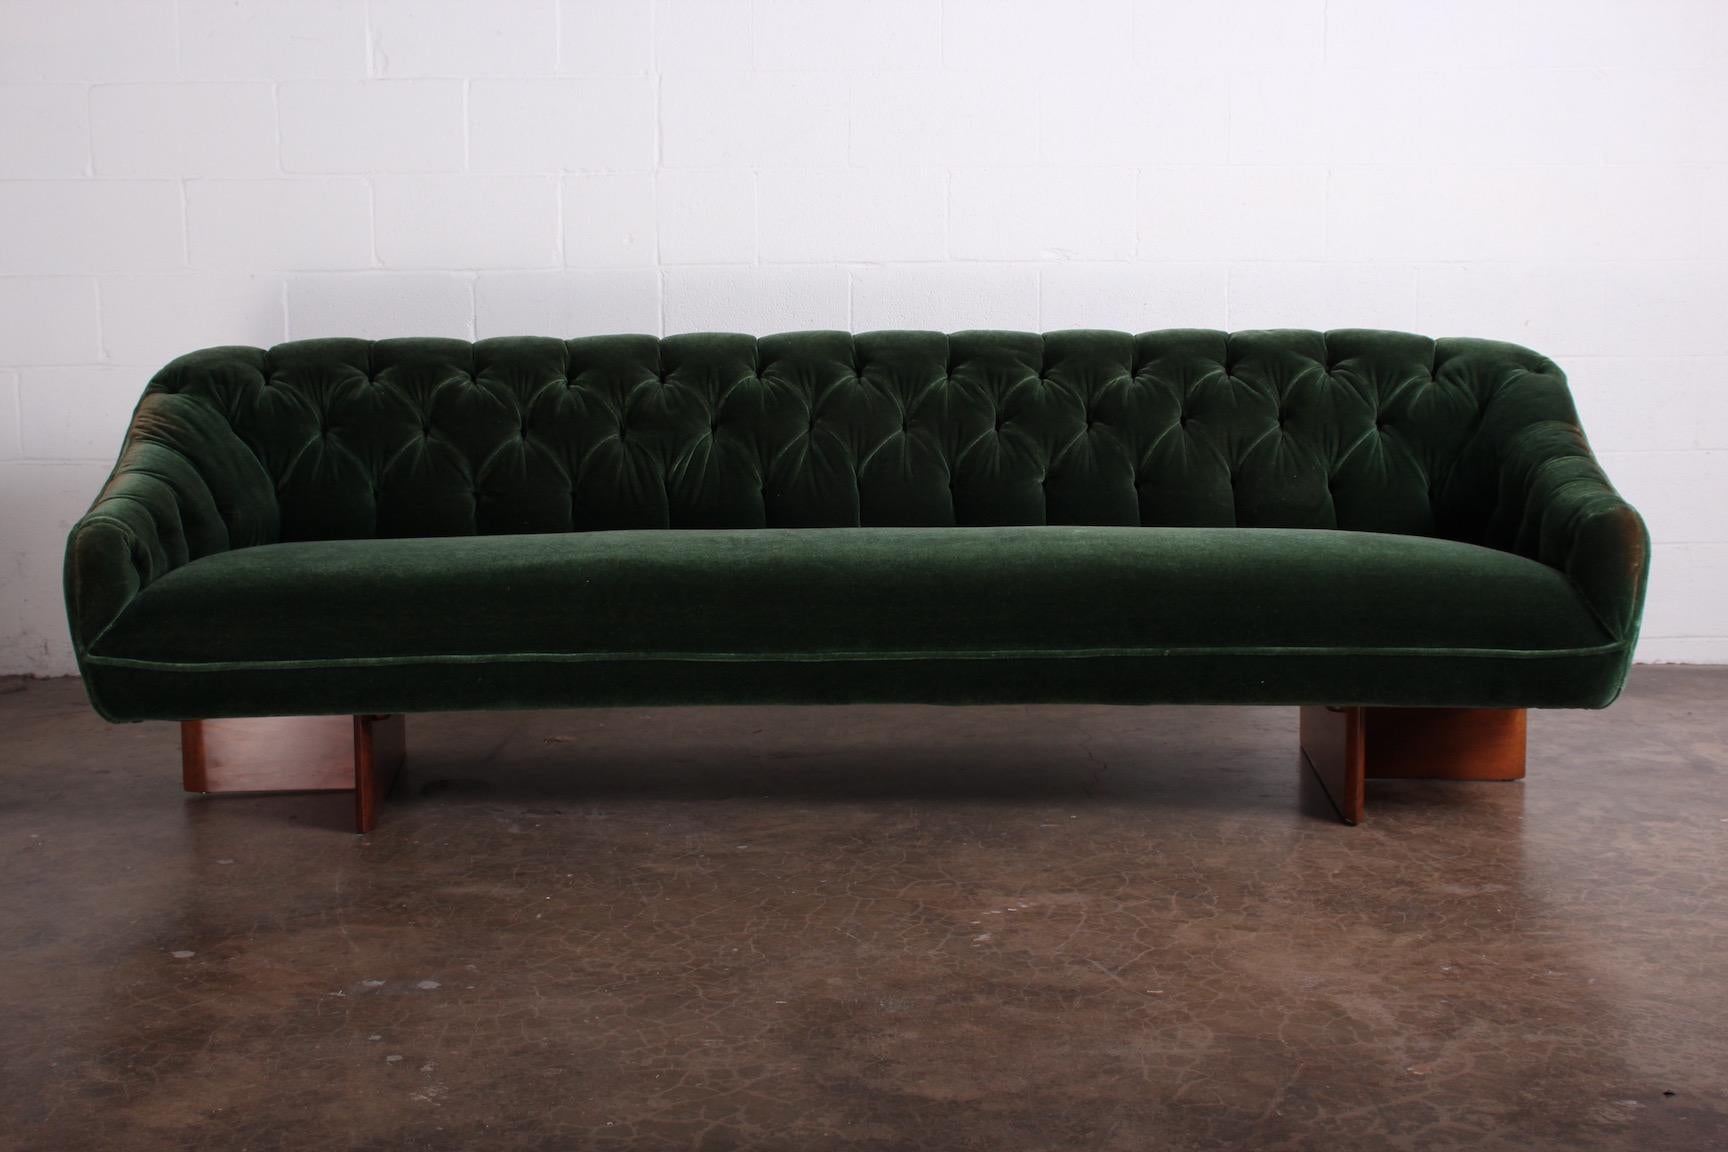 A curved Vladimir Kagan sofa with tufted mohair on walnut bases designed for a Park Ave apartment. The interior was full of Kagan designs including this sofa and matching swivel chairs.